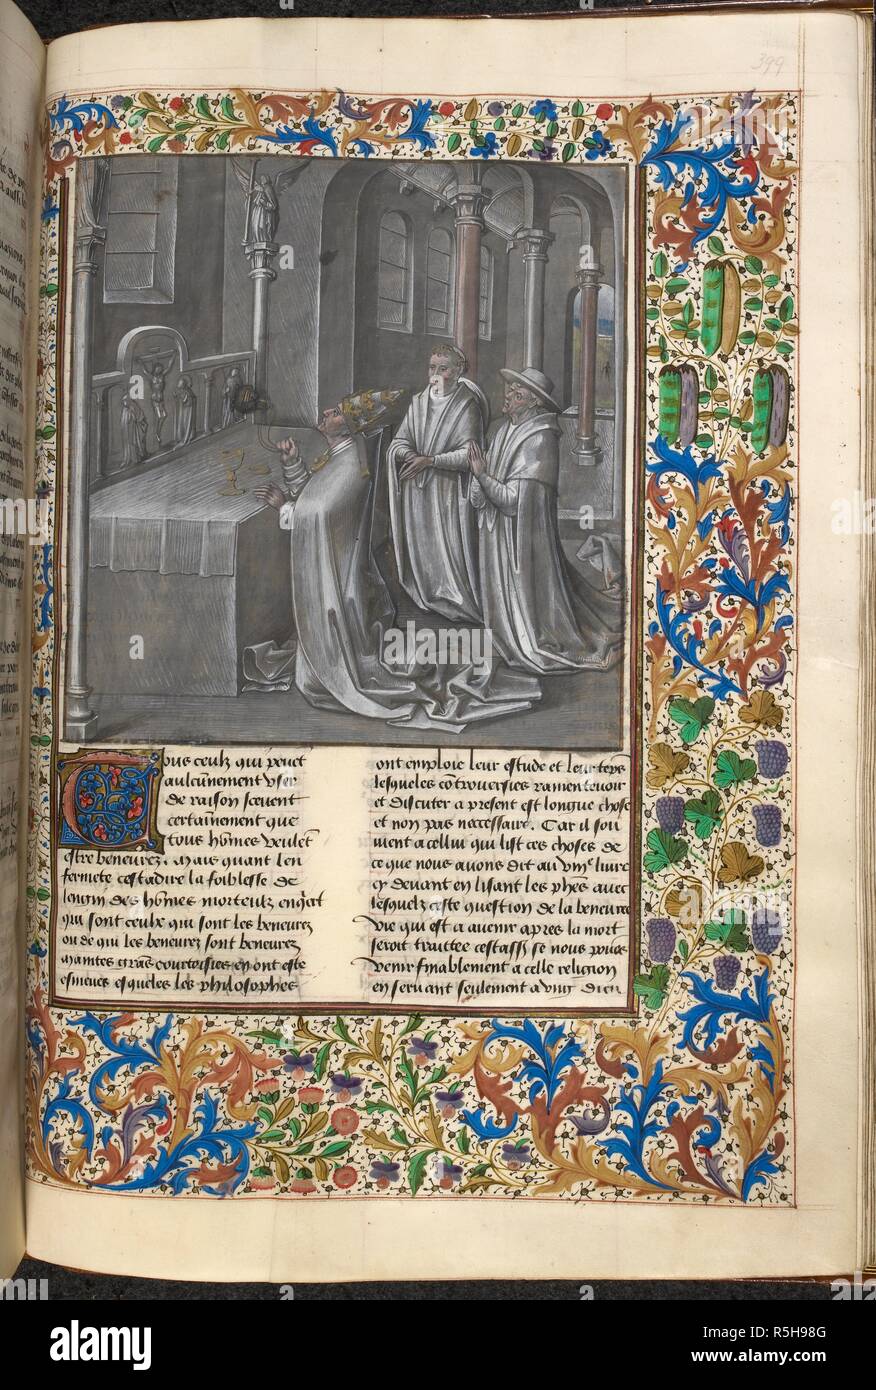 A pope celebrating mass. S. AUGUSTINE, De civitate Dei, in French: the translation and commentary made by Raoul de Presles for Charles V of France. Late 15th century. Source: Royal 14 D. I f.399. Language: French. Author: de Presles, Raoul (Translator). Stock Photo